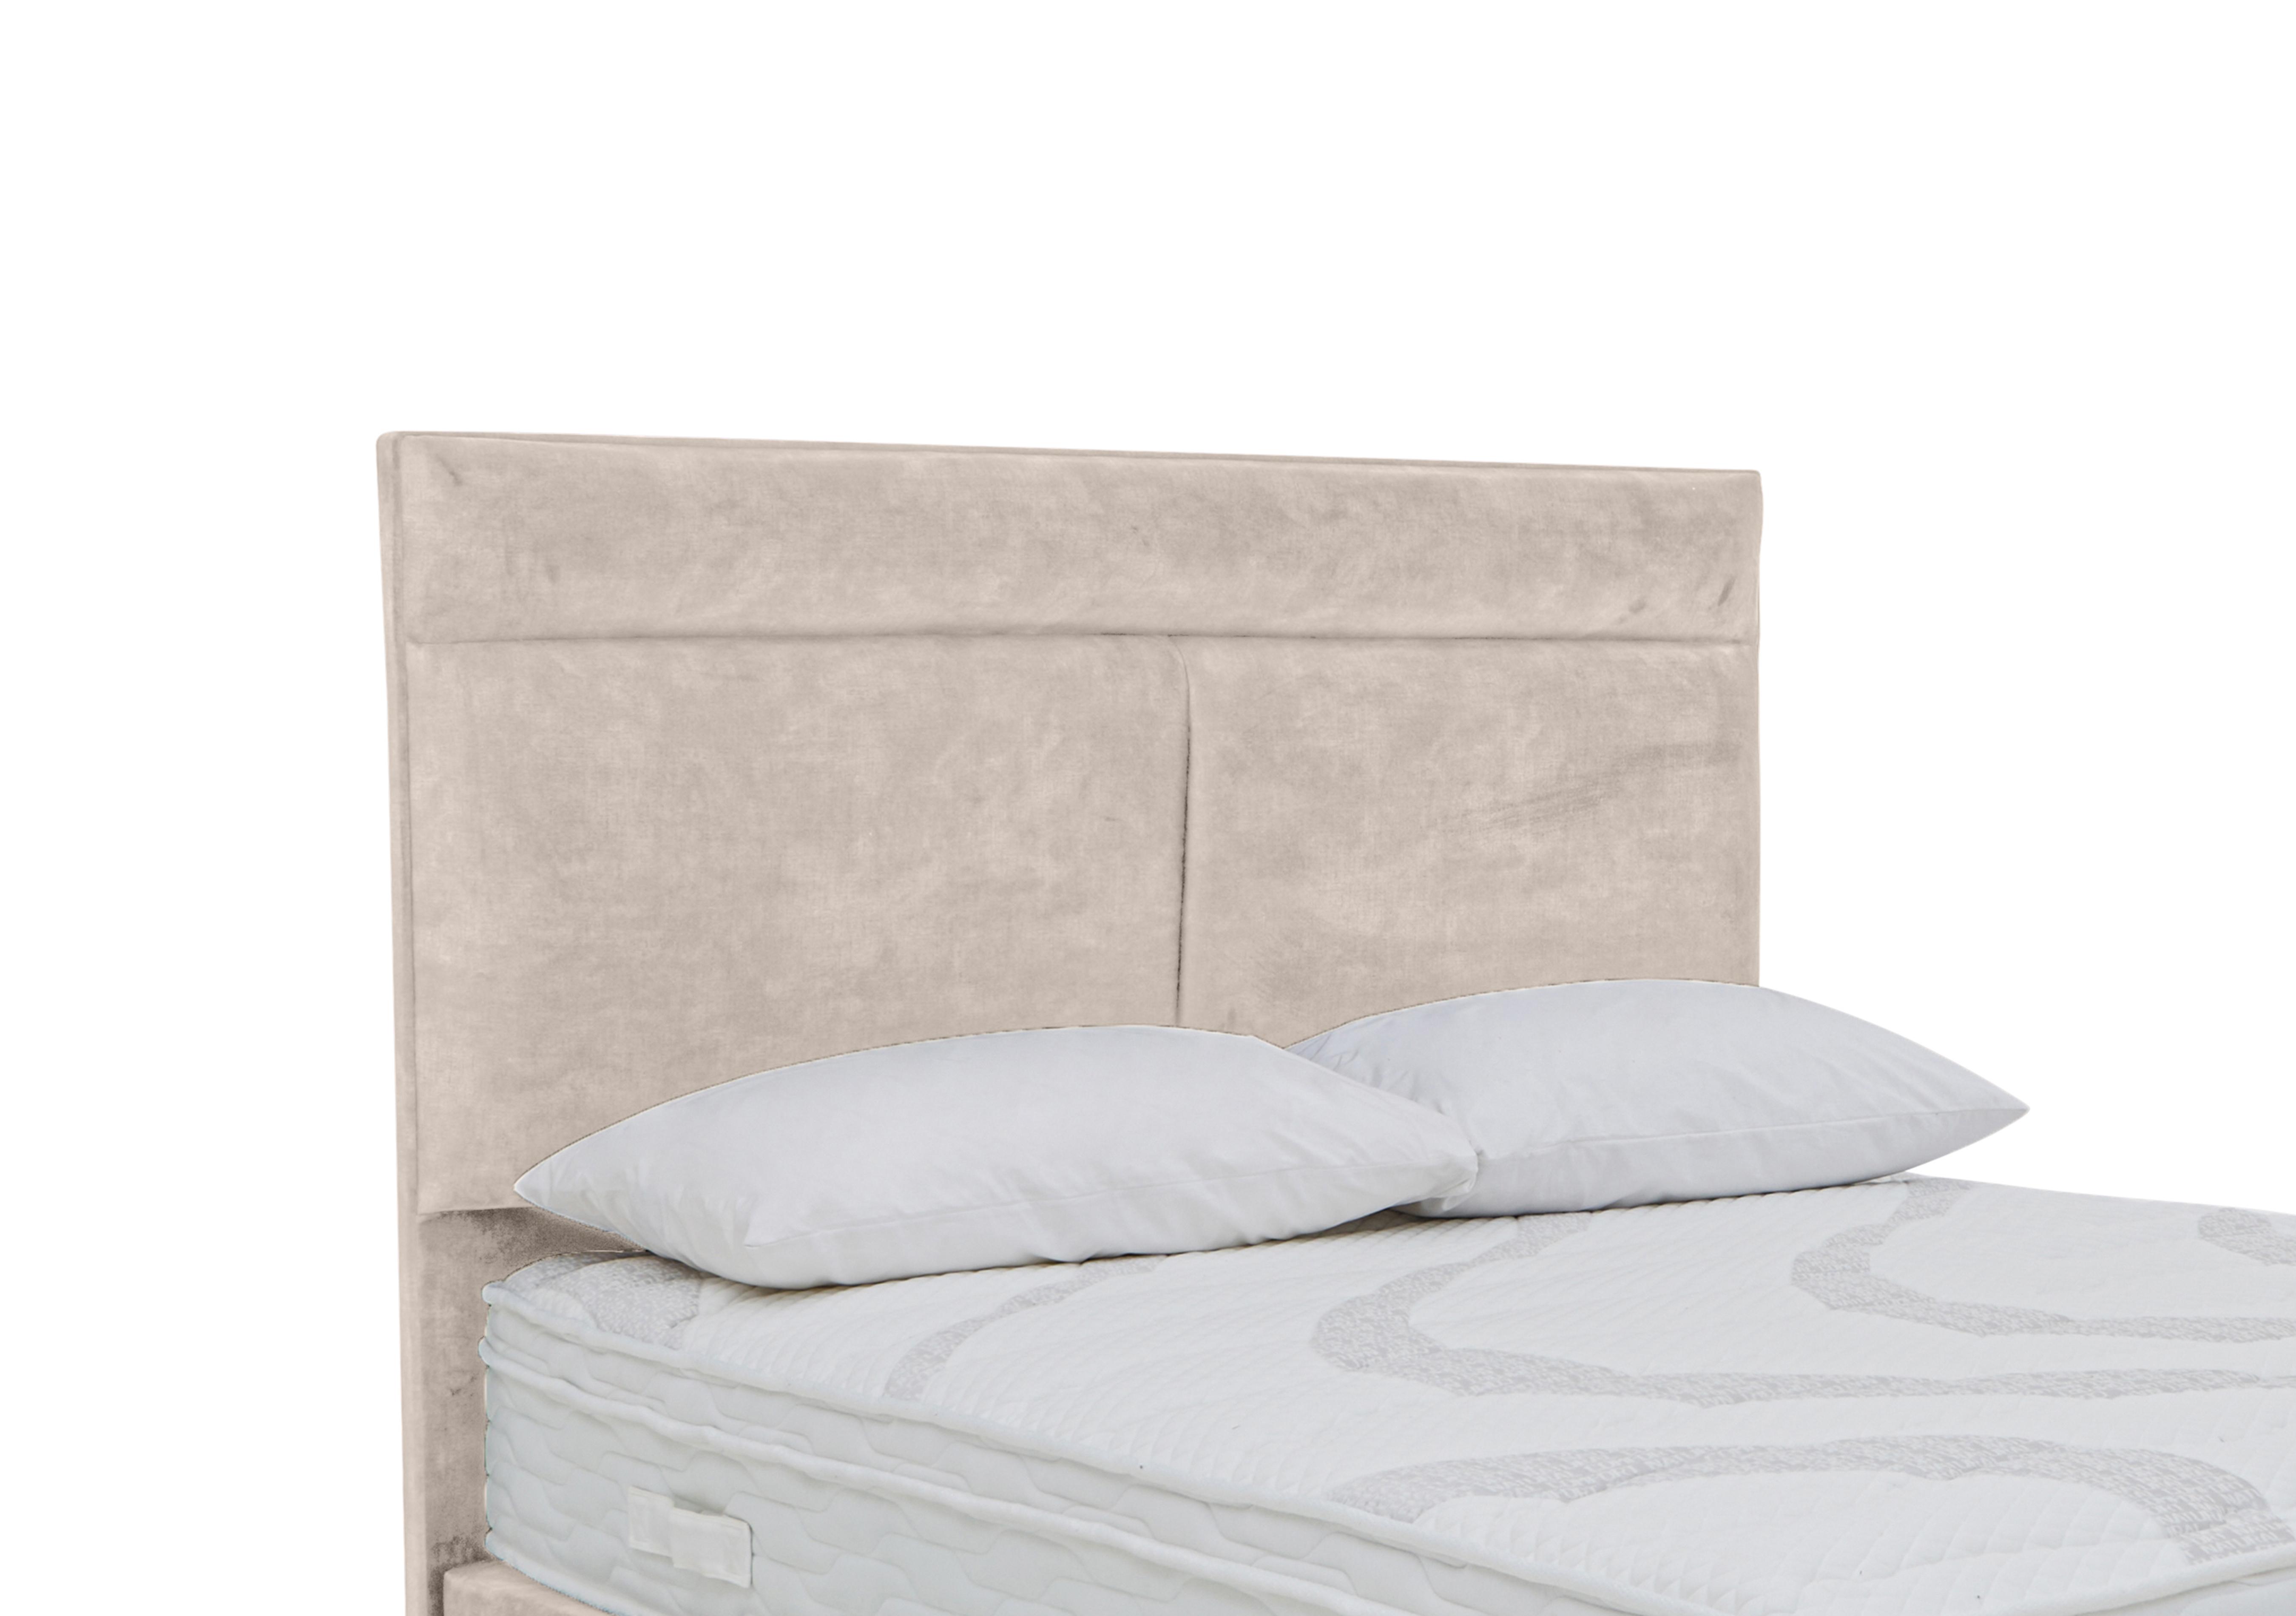 Christie Floor Standing Headboard in Lace Ivory on Furniture Village